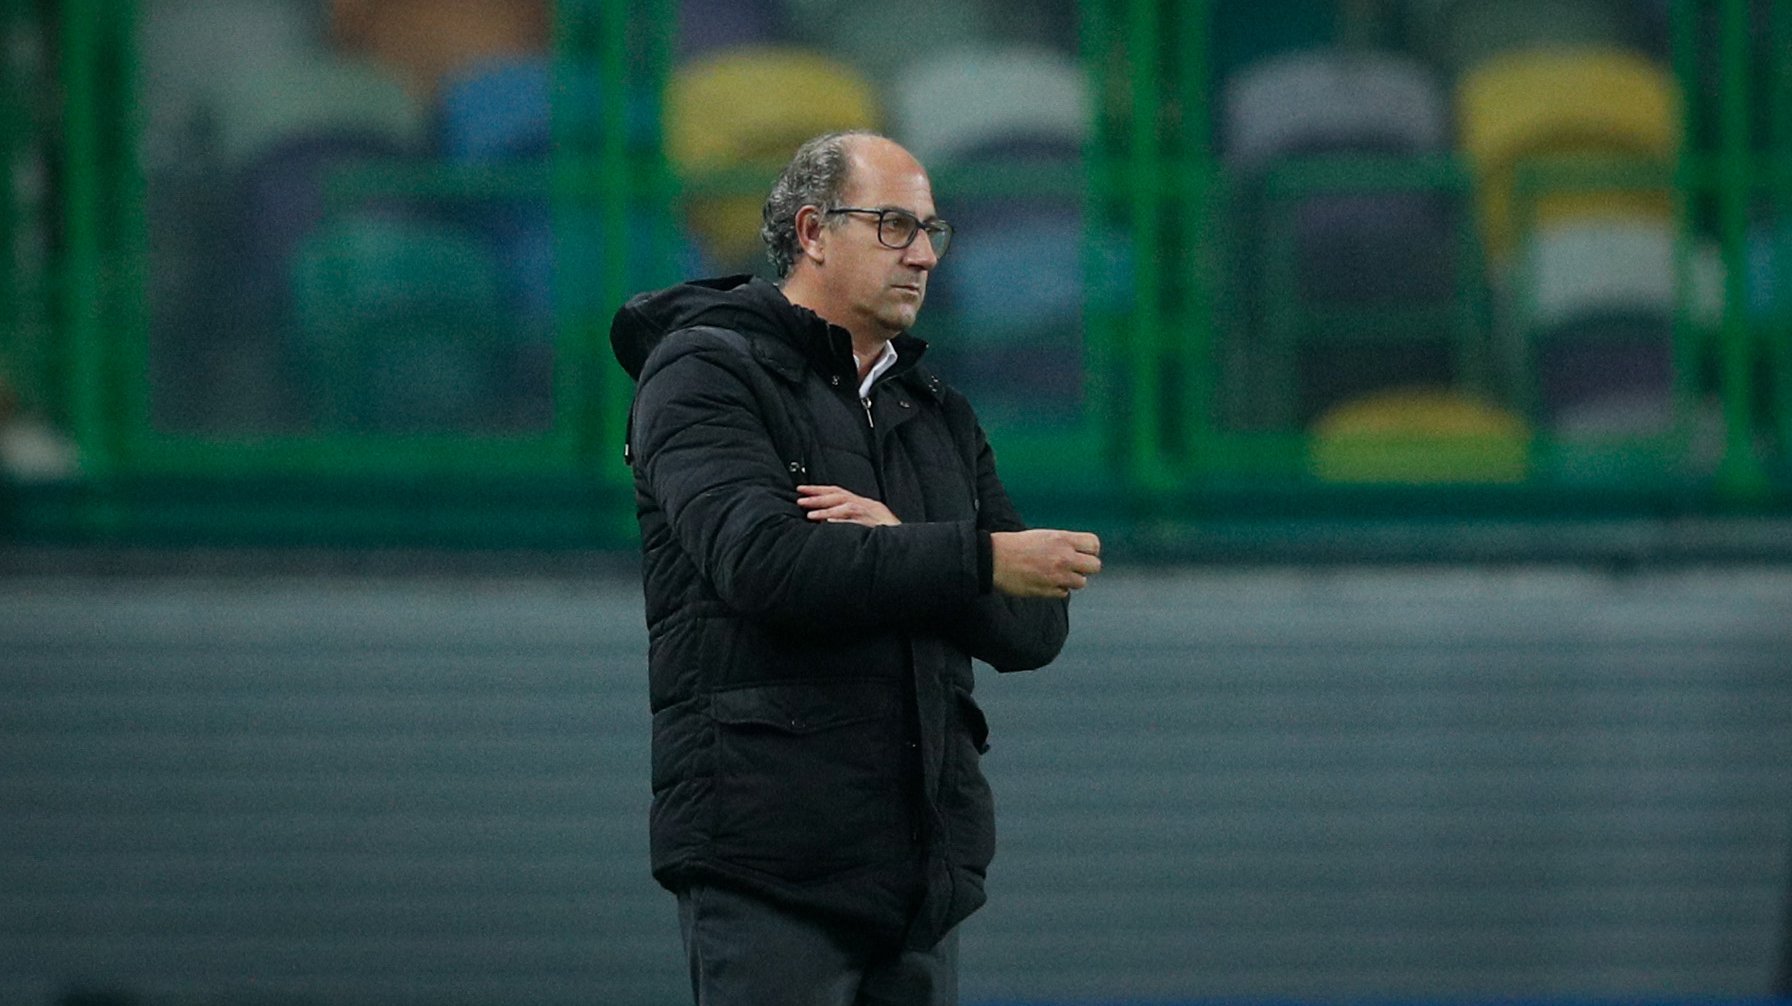 Rio Ave head coach Pedro Cunha reacts during the Portuguese First League soccer match between Sporting Lisbon vs Rio Ave  at Alvalade Stadium in Lisbon, Portugal, 15 January 2021.  ANTONIO COTRIM/LUSA